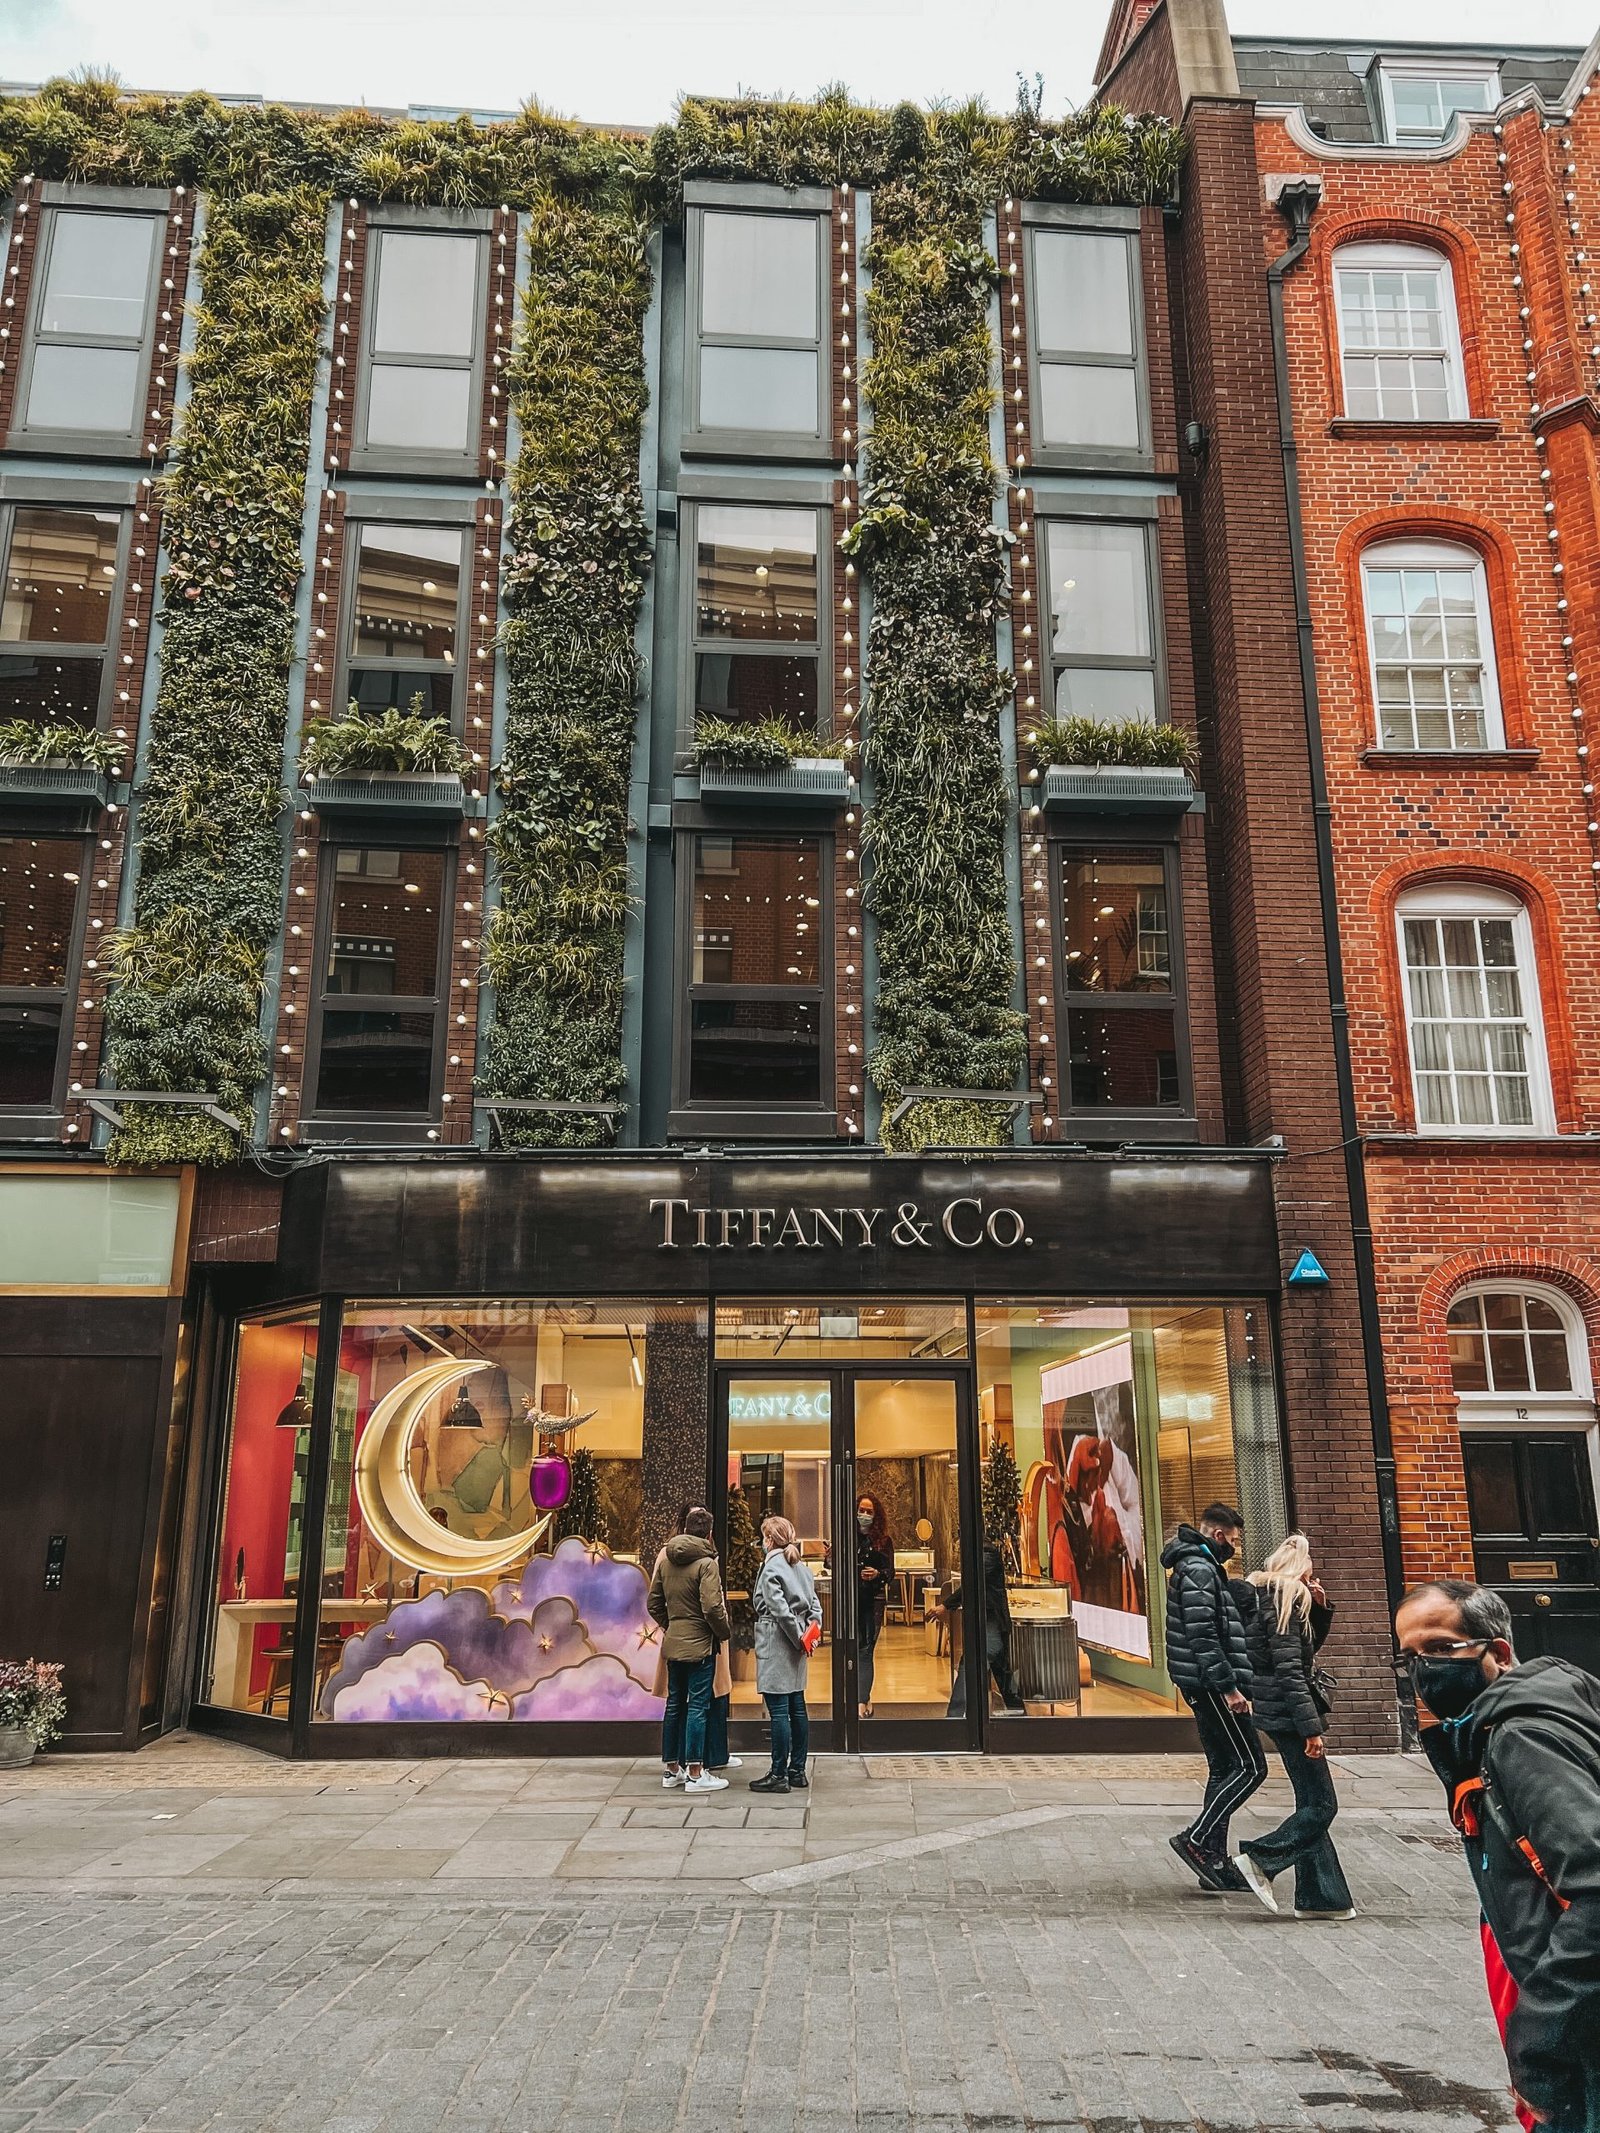 Tiffany and Co New bond street
Most Instagrammable spots in London 